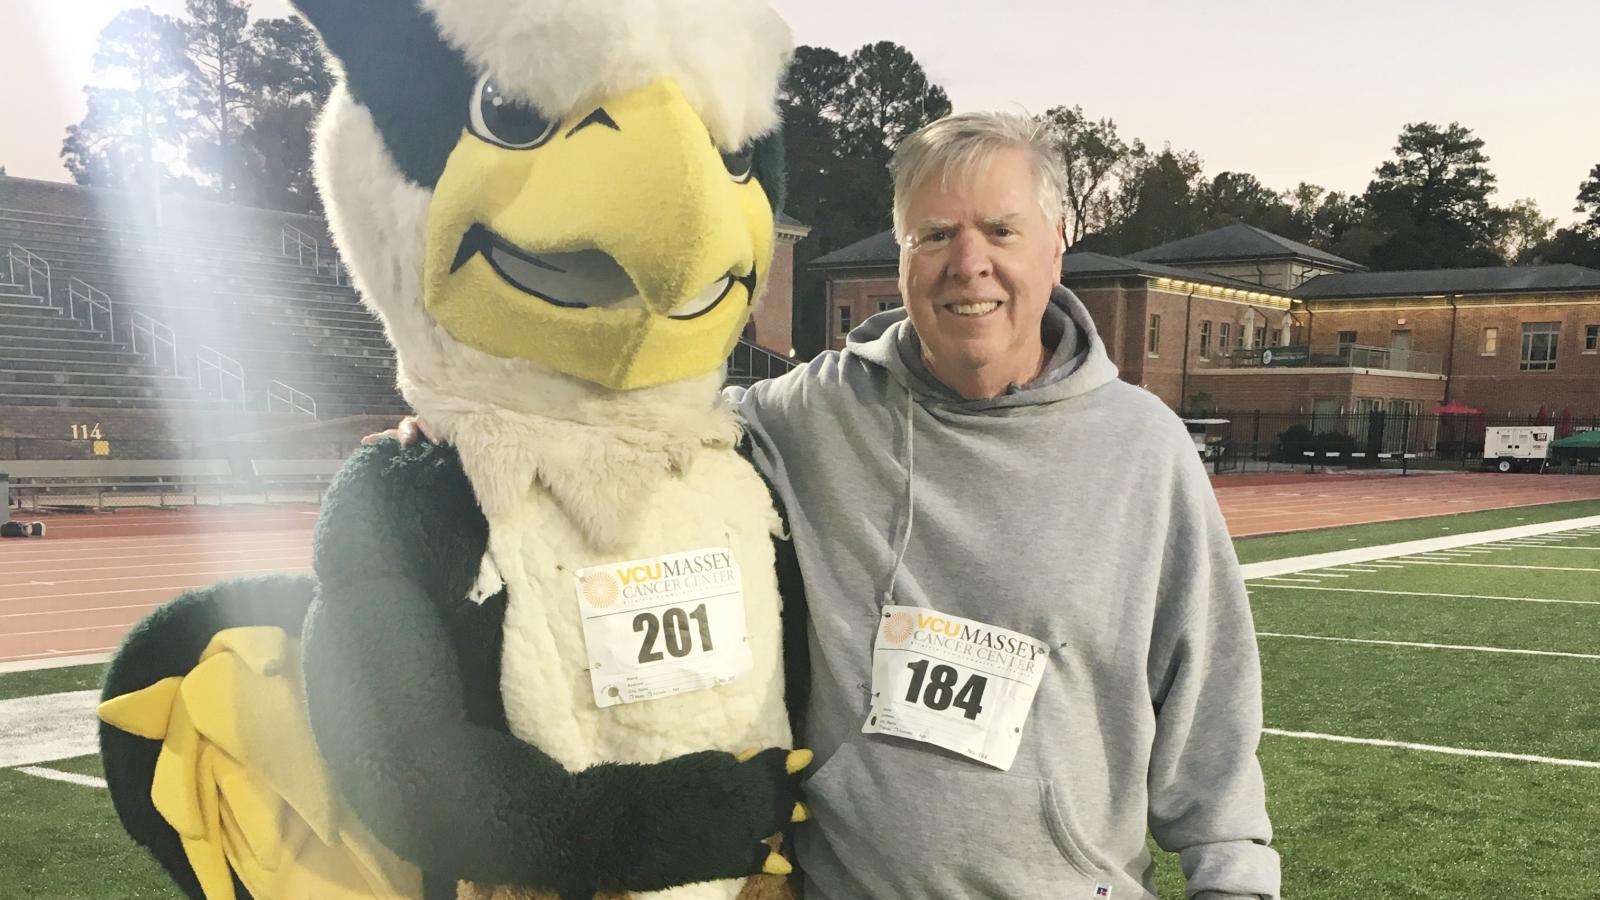 Charles Crone with the W&M mascot at the 2016 Massey Cancer Center 5K.